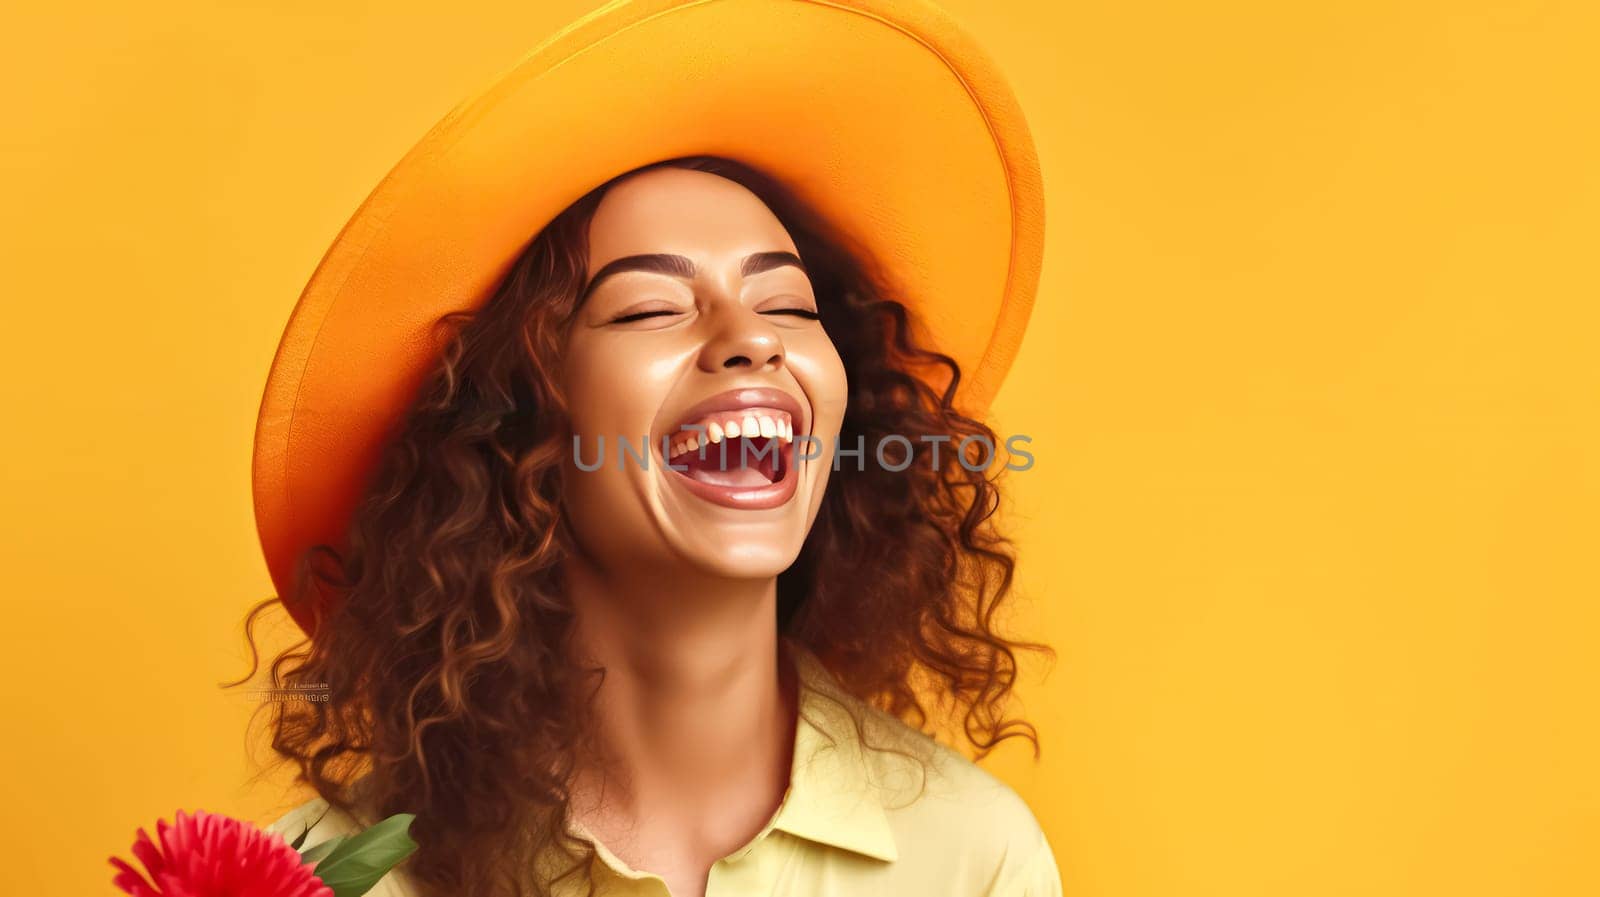 A woman with long hair is smiling and holding a yellow flower. Concept of happiness and joy, as the woman is enjoying her time and the beautiful flower